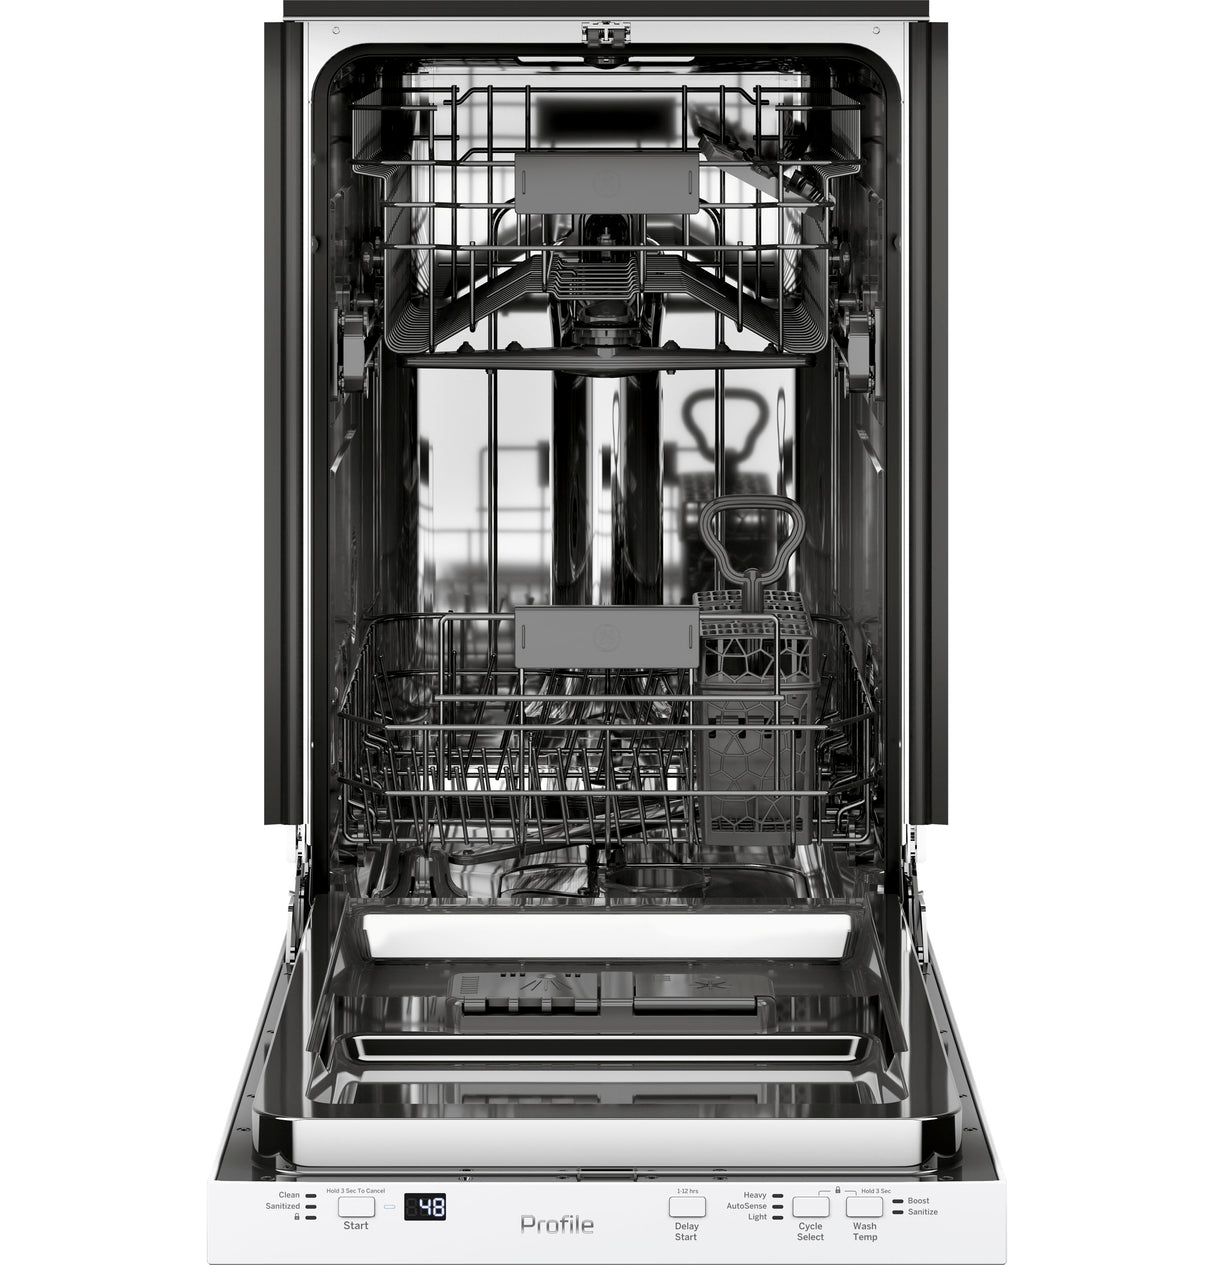 GE Profile(TM) ENERGY STAR(R) 18" ADA Compliant Stainless Steel Interior Dishwasher with Sanitize Cycle - (PDT145SGLWW)